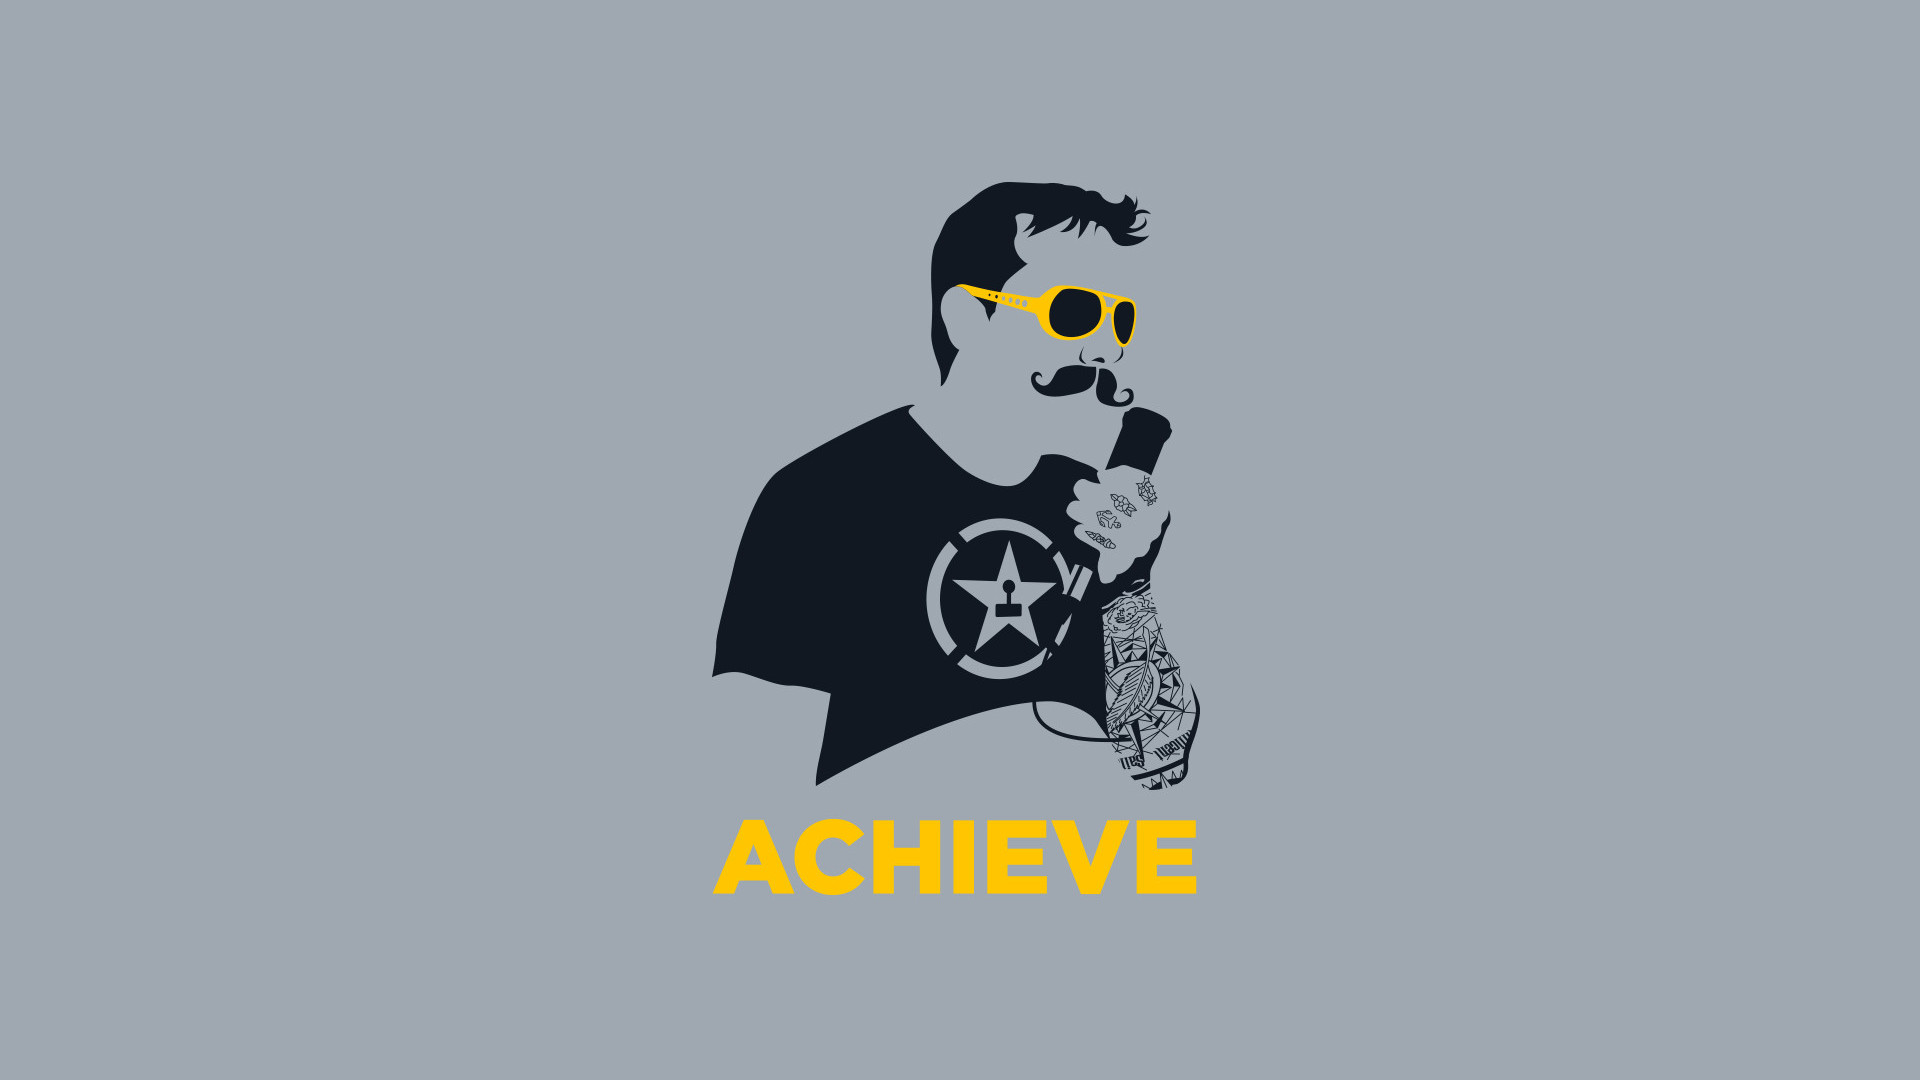 1920x1080 Achievement Hunter "Achieve" complete wallpaper set - I couldn't find most  of these as wallpapers, so I made them all from the T-shirt graphics.